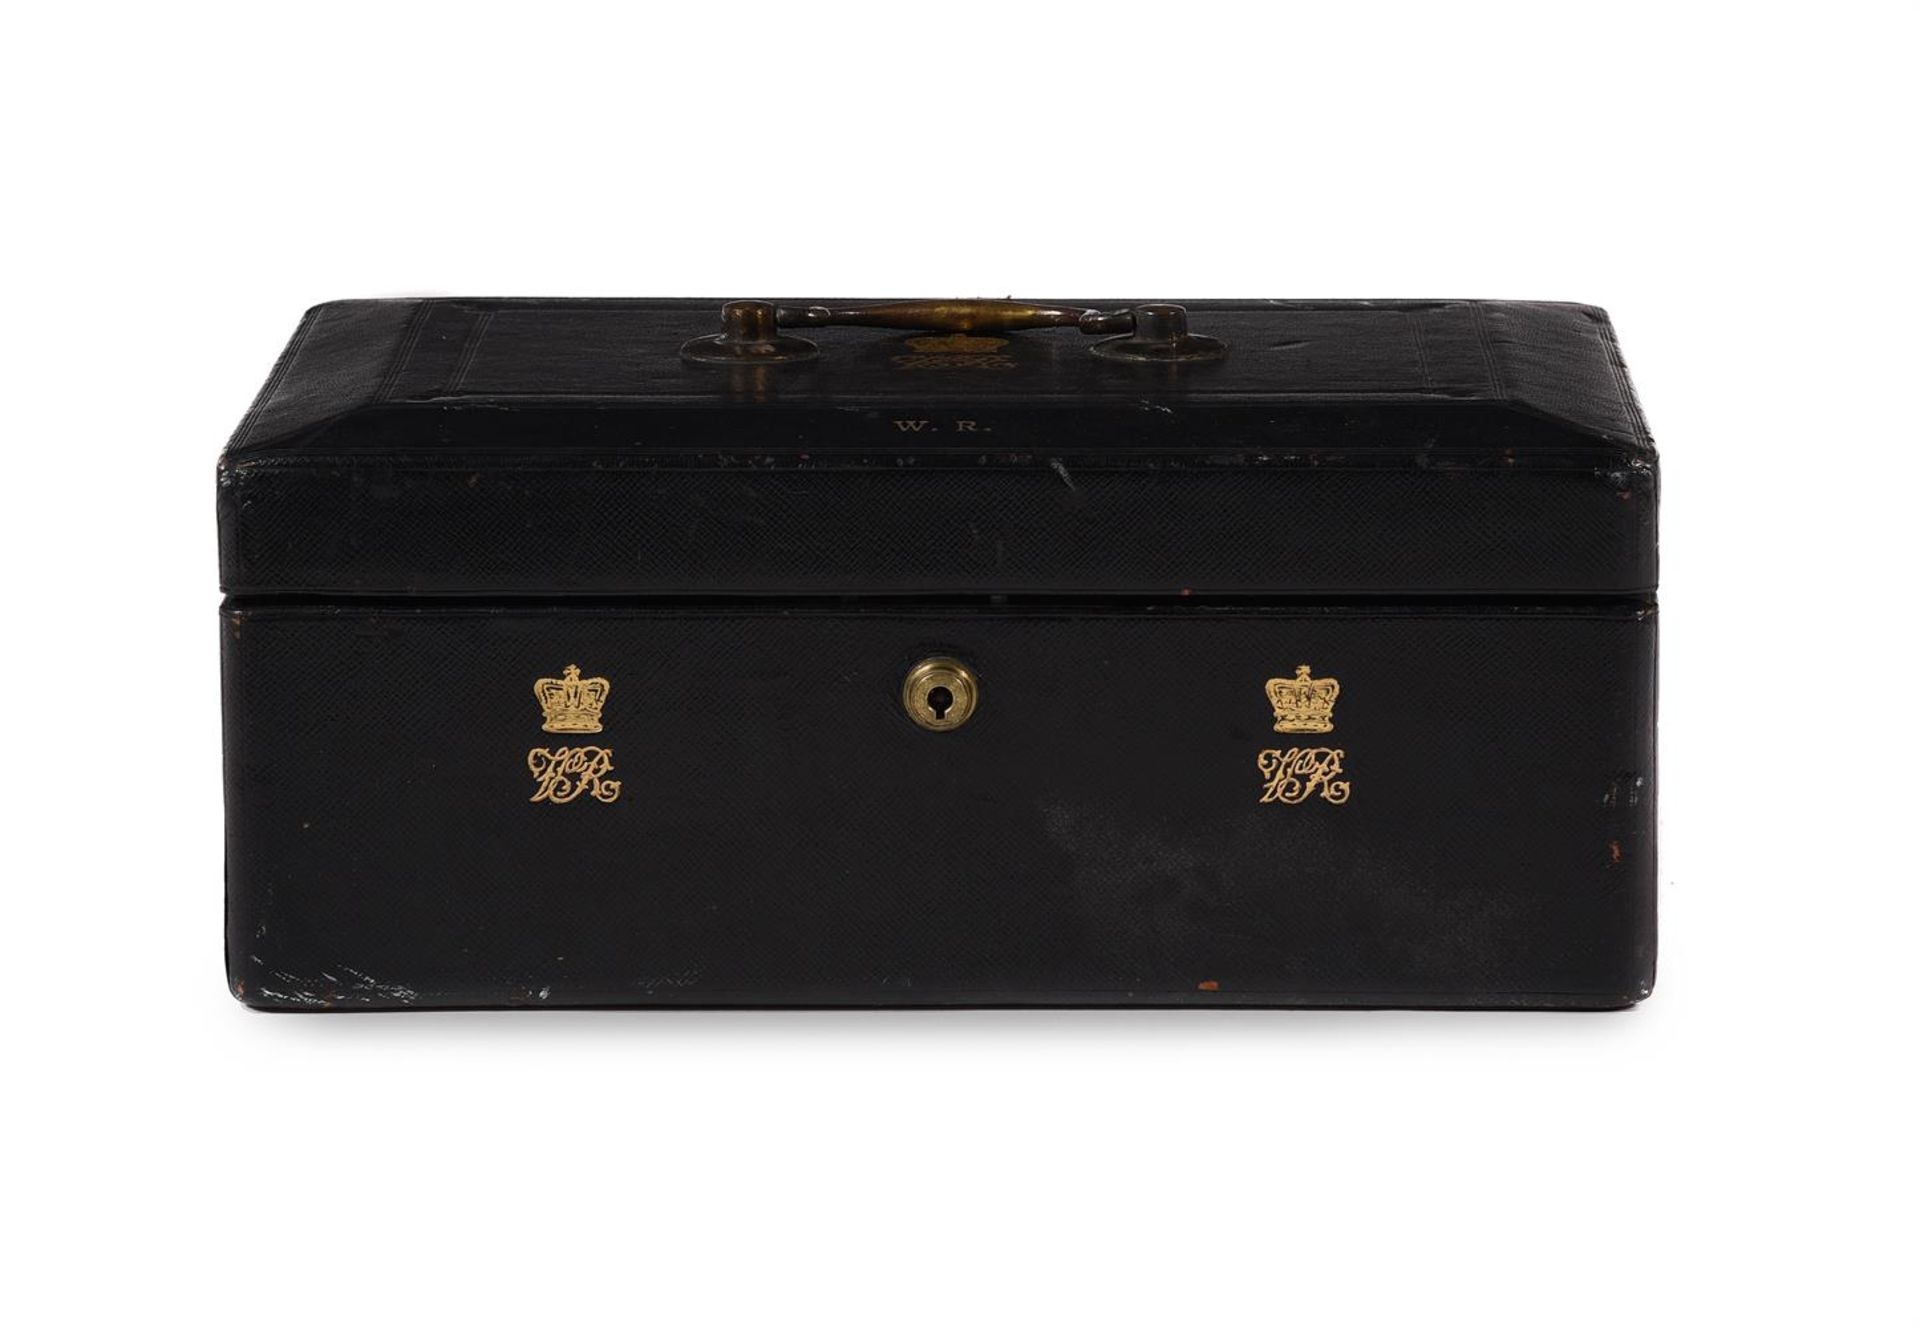 A VICTORIAN MOROCCO LEATHER DOCUMENT OR DISPATCH BOX, BY SAMPSON MORDAN & CO, CIRCA 1840